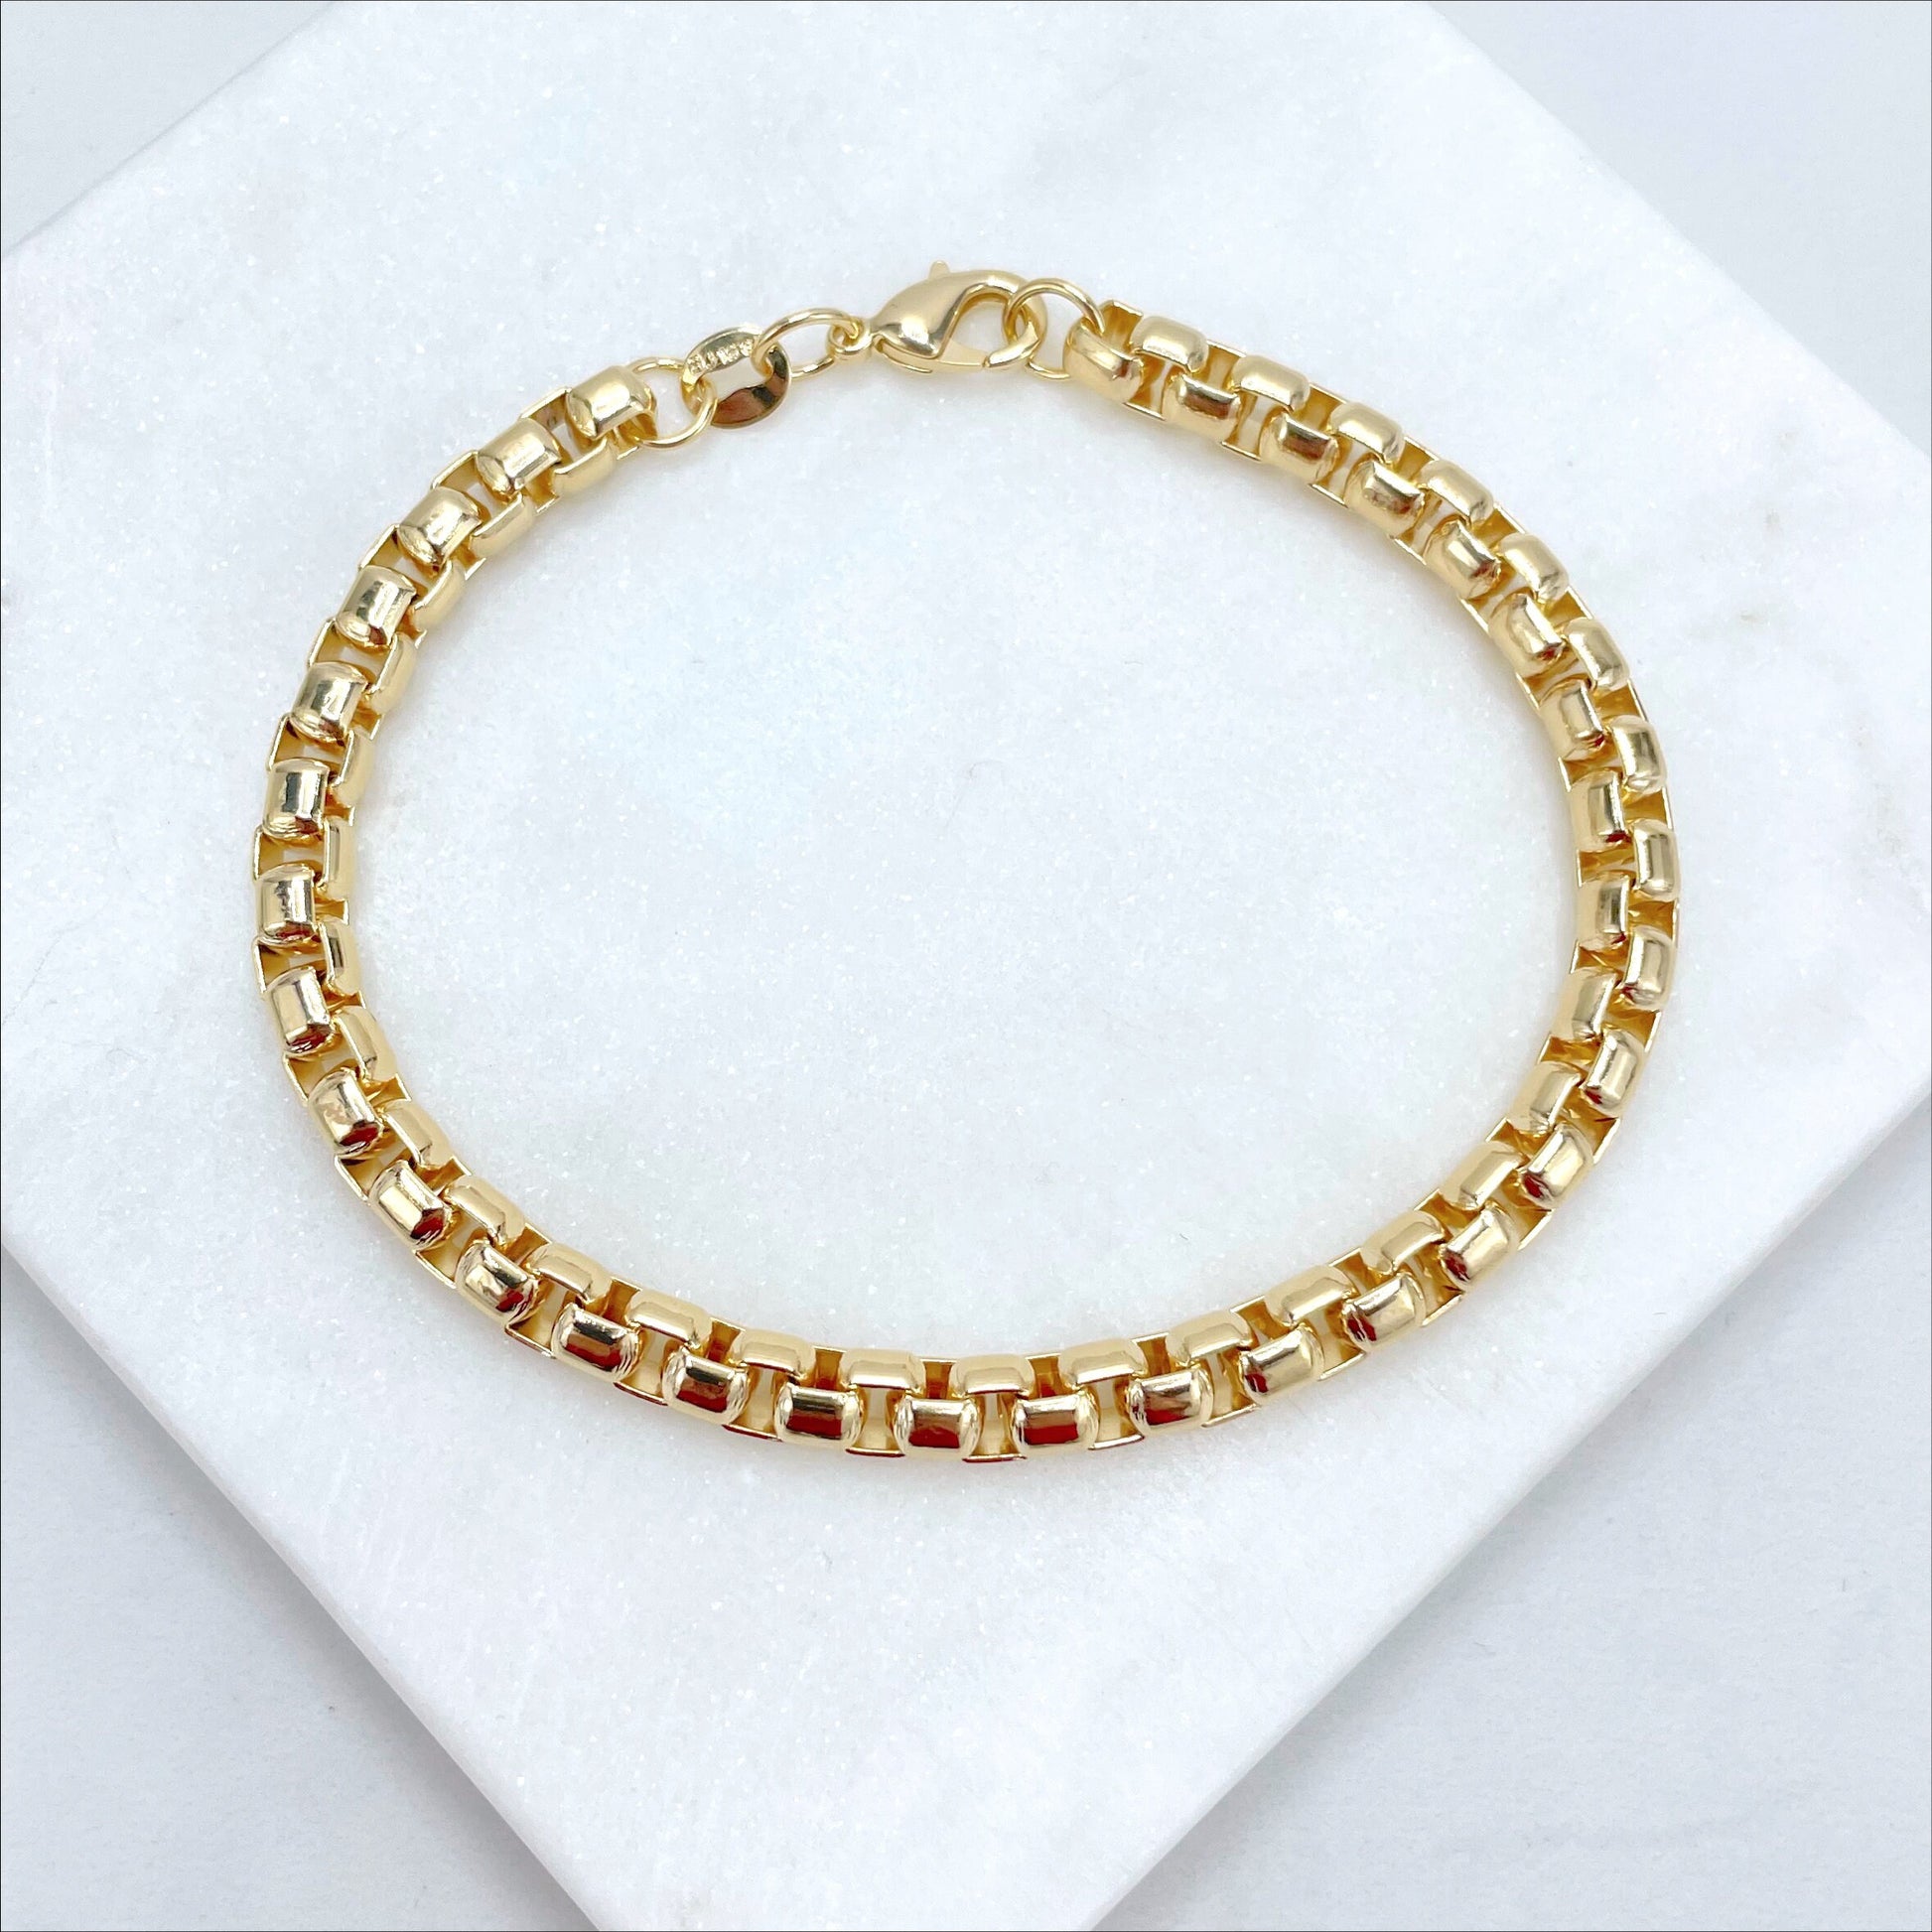 18k Gold  Filled, Ultra Light, 5mm Box Chain Link 18" to 20'', 28'', 7'' and 8.5''  Long, Unisex Chain Wholesale Jewelry Making Supplies